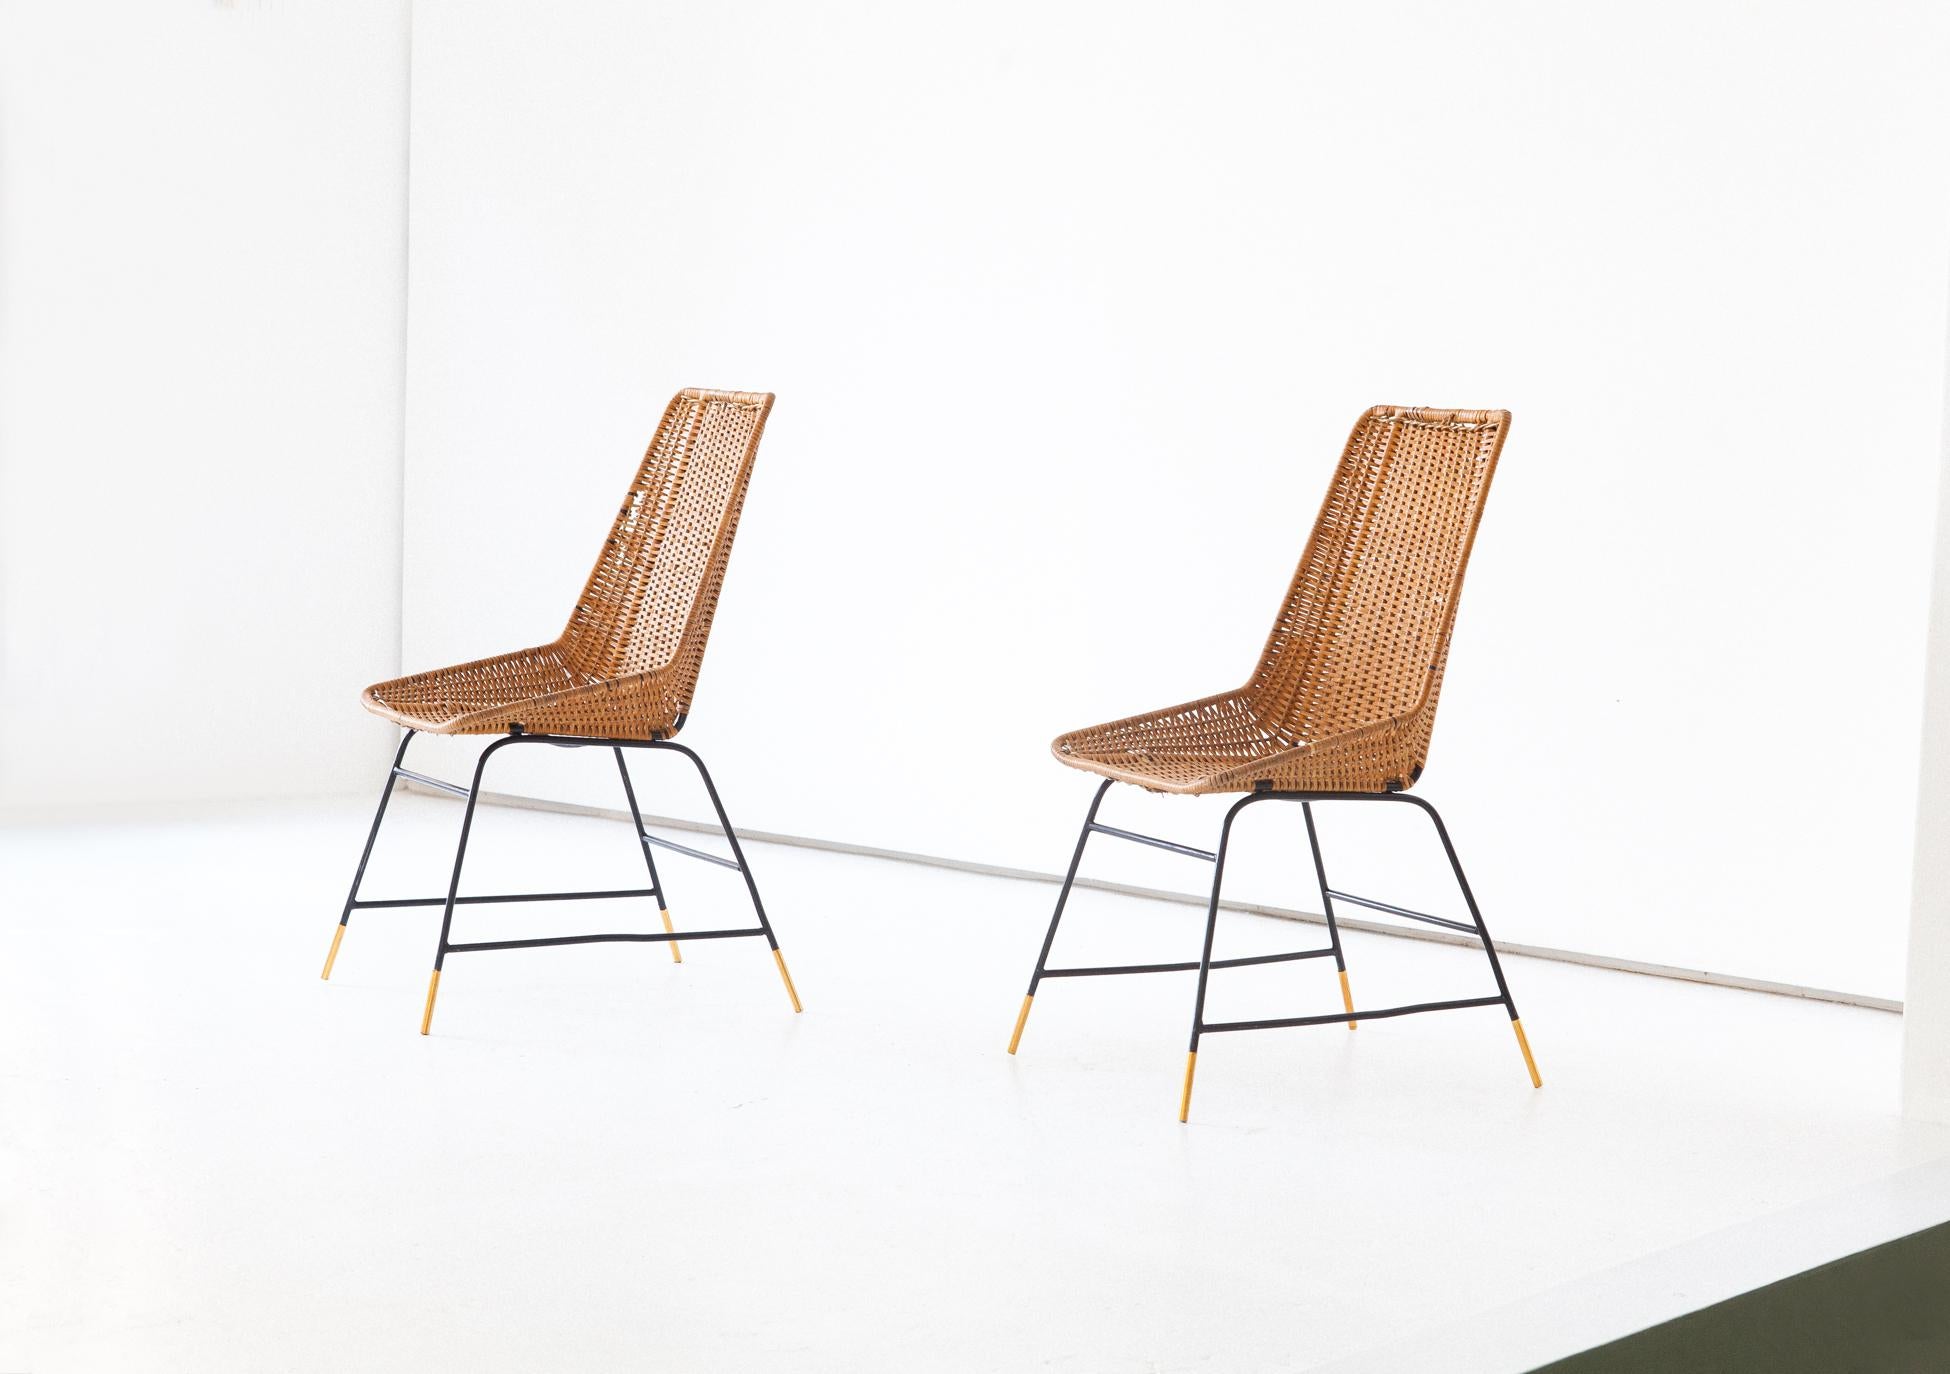 Set of two Mid-Century Modern easy chairs manufactured in Italy in the 1950s
This seat of each chair are made of wicker with black enameled iron frame and brass feats
Each frame of chair is restored but the wicker have signs of age and little